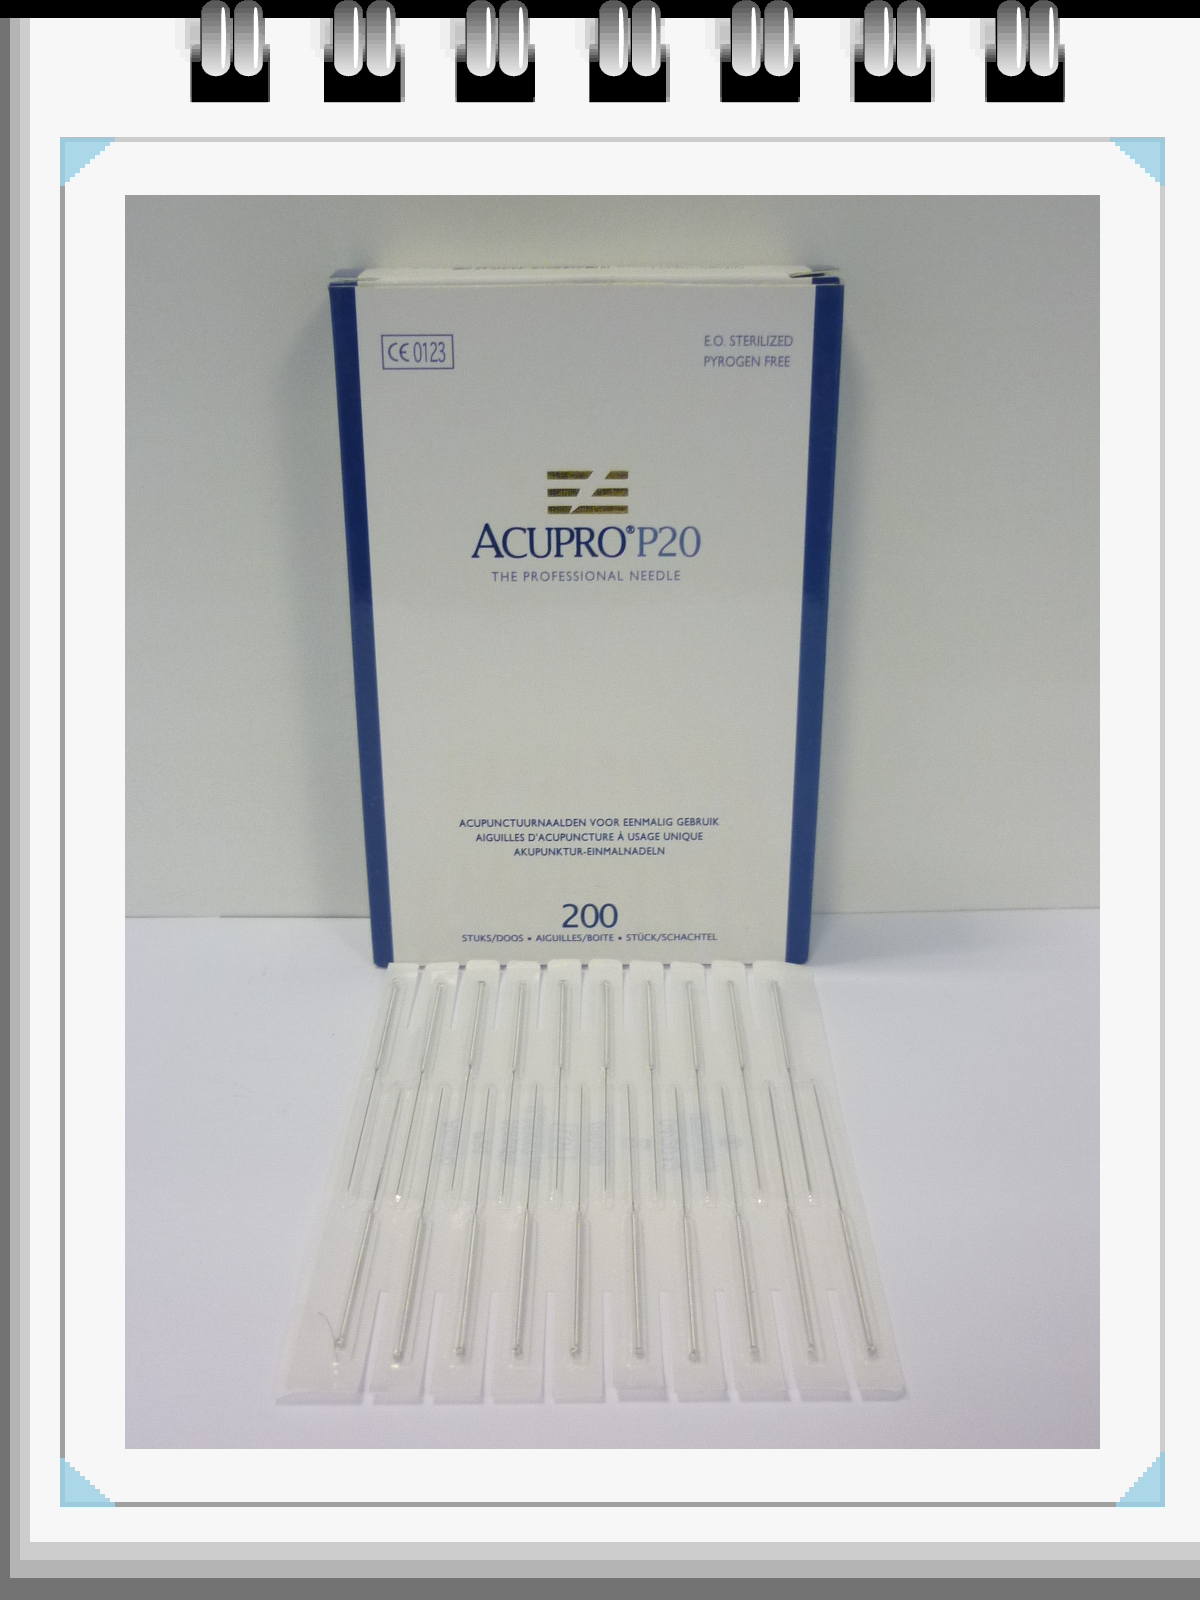 All Products - Acupuncture naalden 0,25 x 50mm - p--200